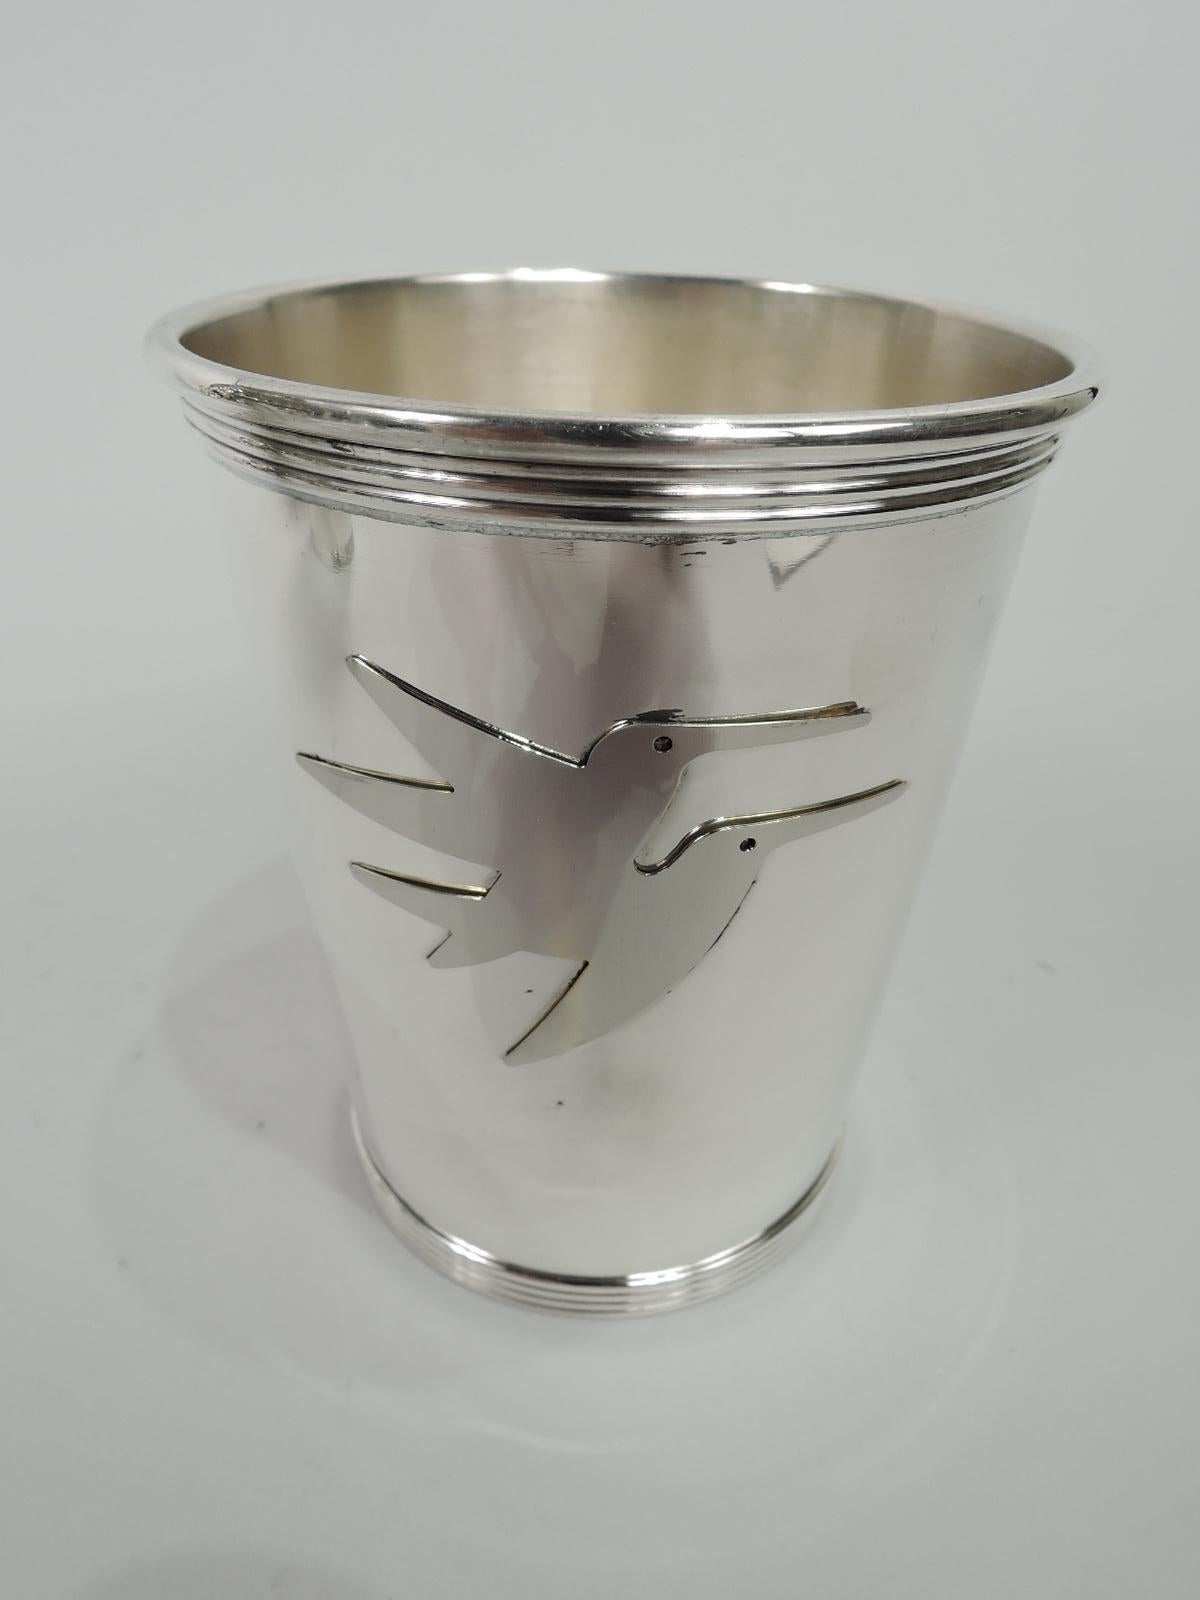 Pair of Modern sterling silver mint julep cups. Made by Gorham in Providence. Each: Straight and tapering, and reeded rim and foot. Cutout pair of semi-abstract birds applied to side. Traditional form with midcentury free spiritedness. Marked